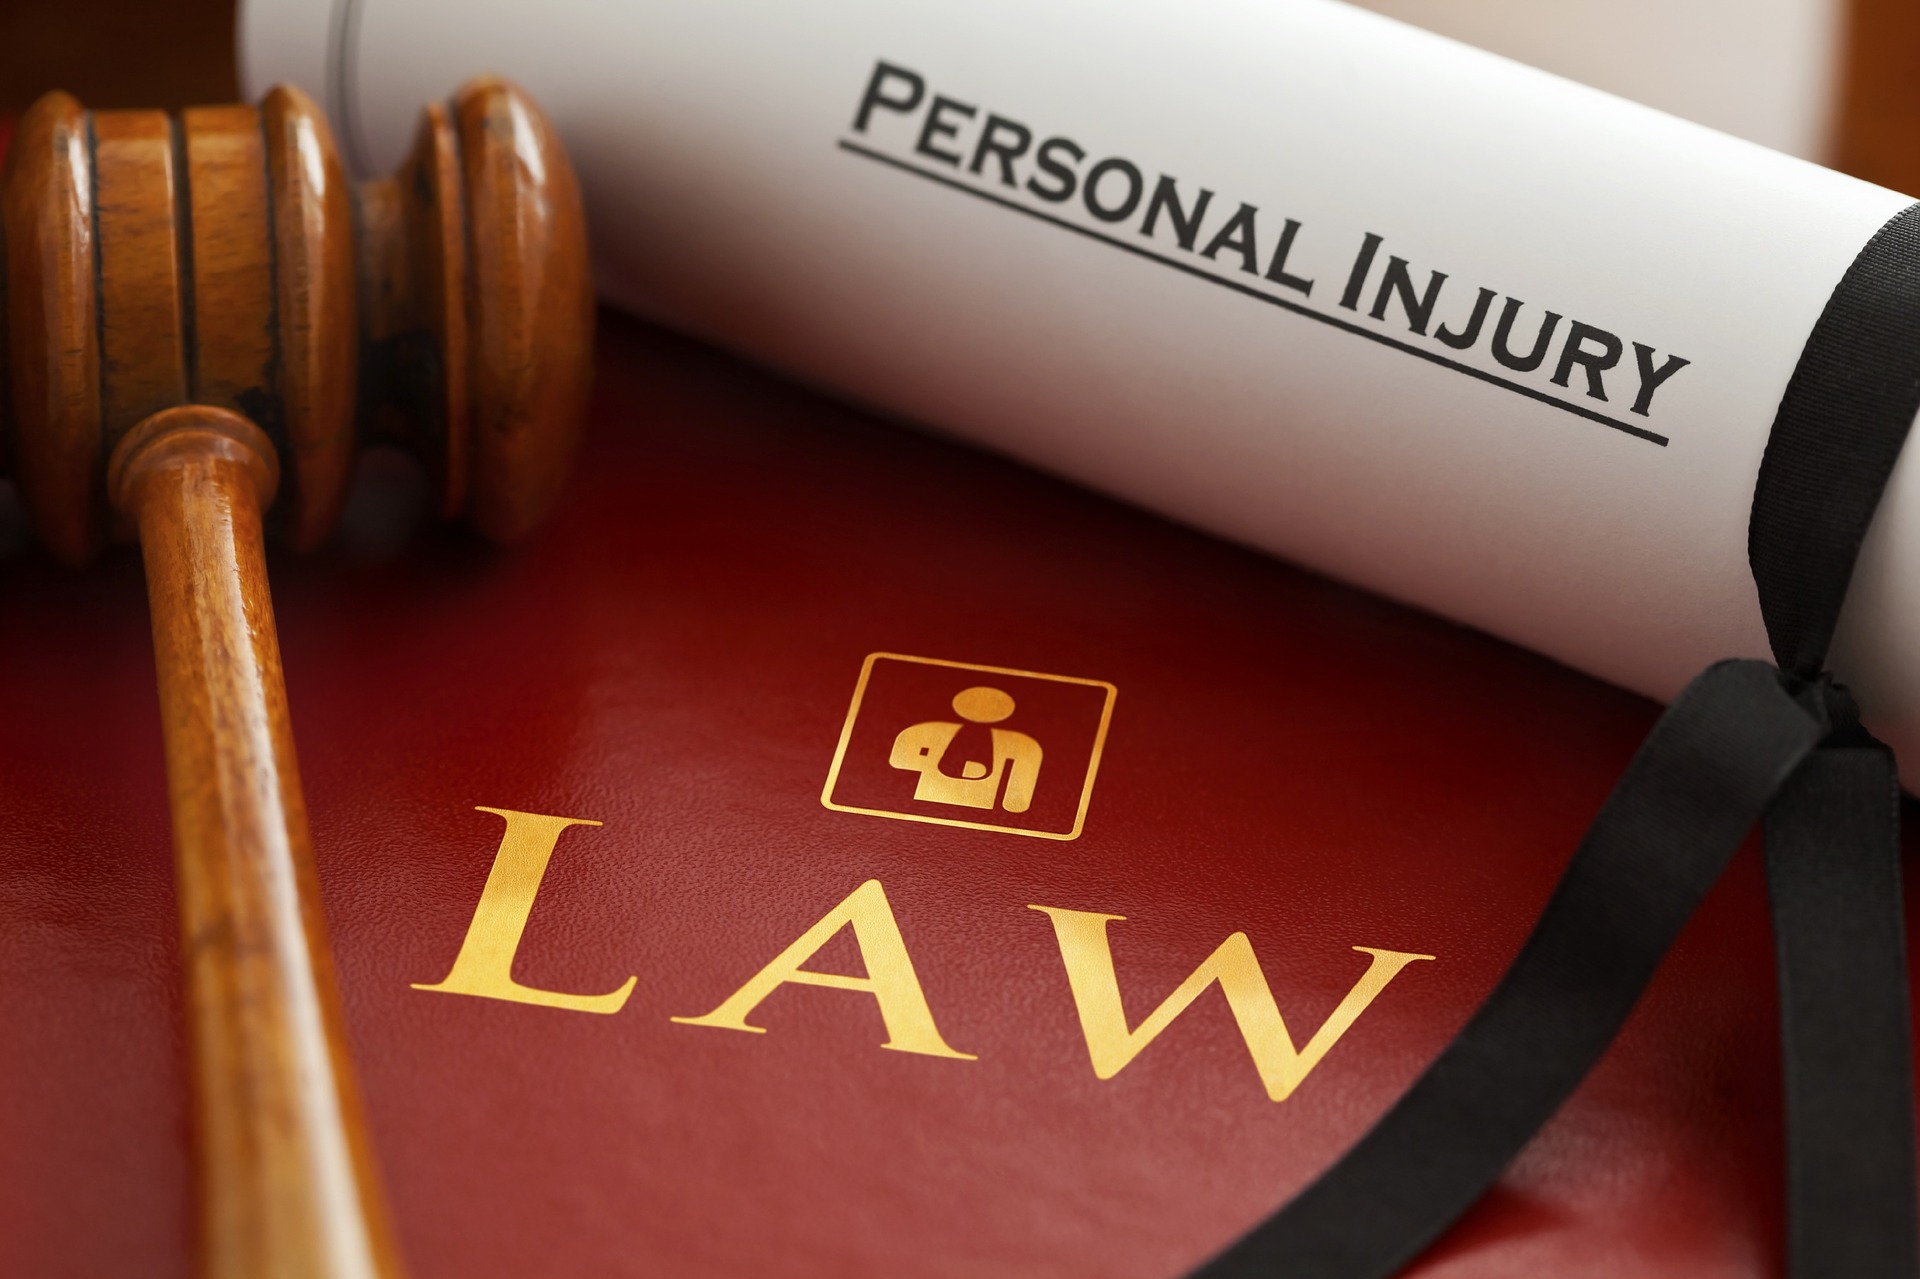 Discourse on Personal Injury Lawyers in the United States